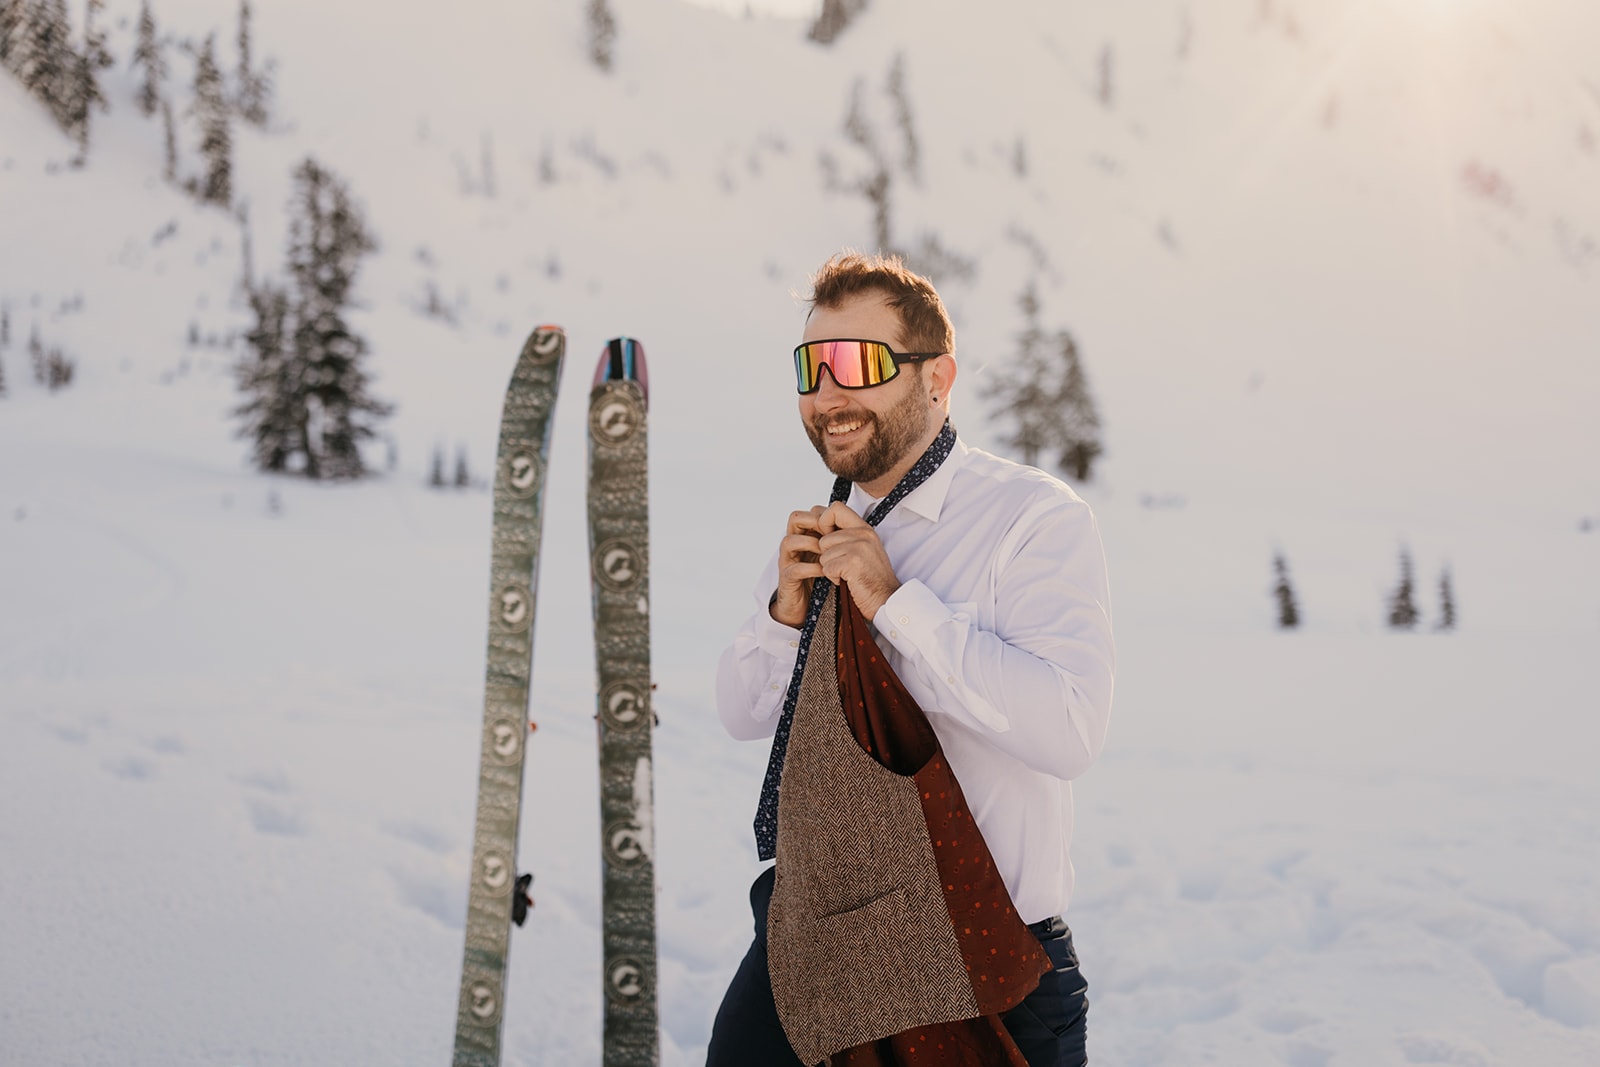 A groom gets ready for his wedding that he skied into.